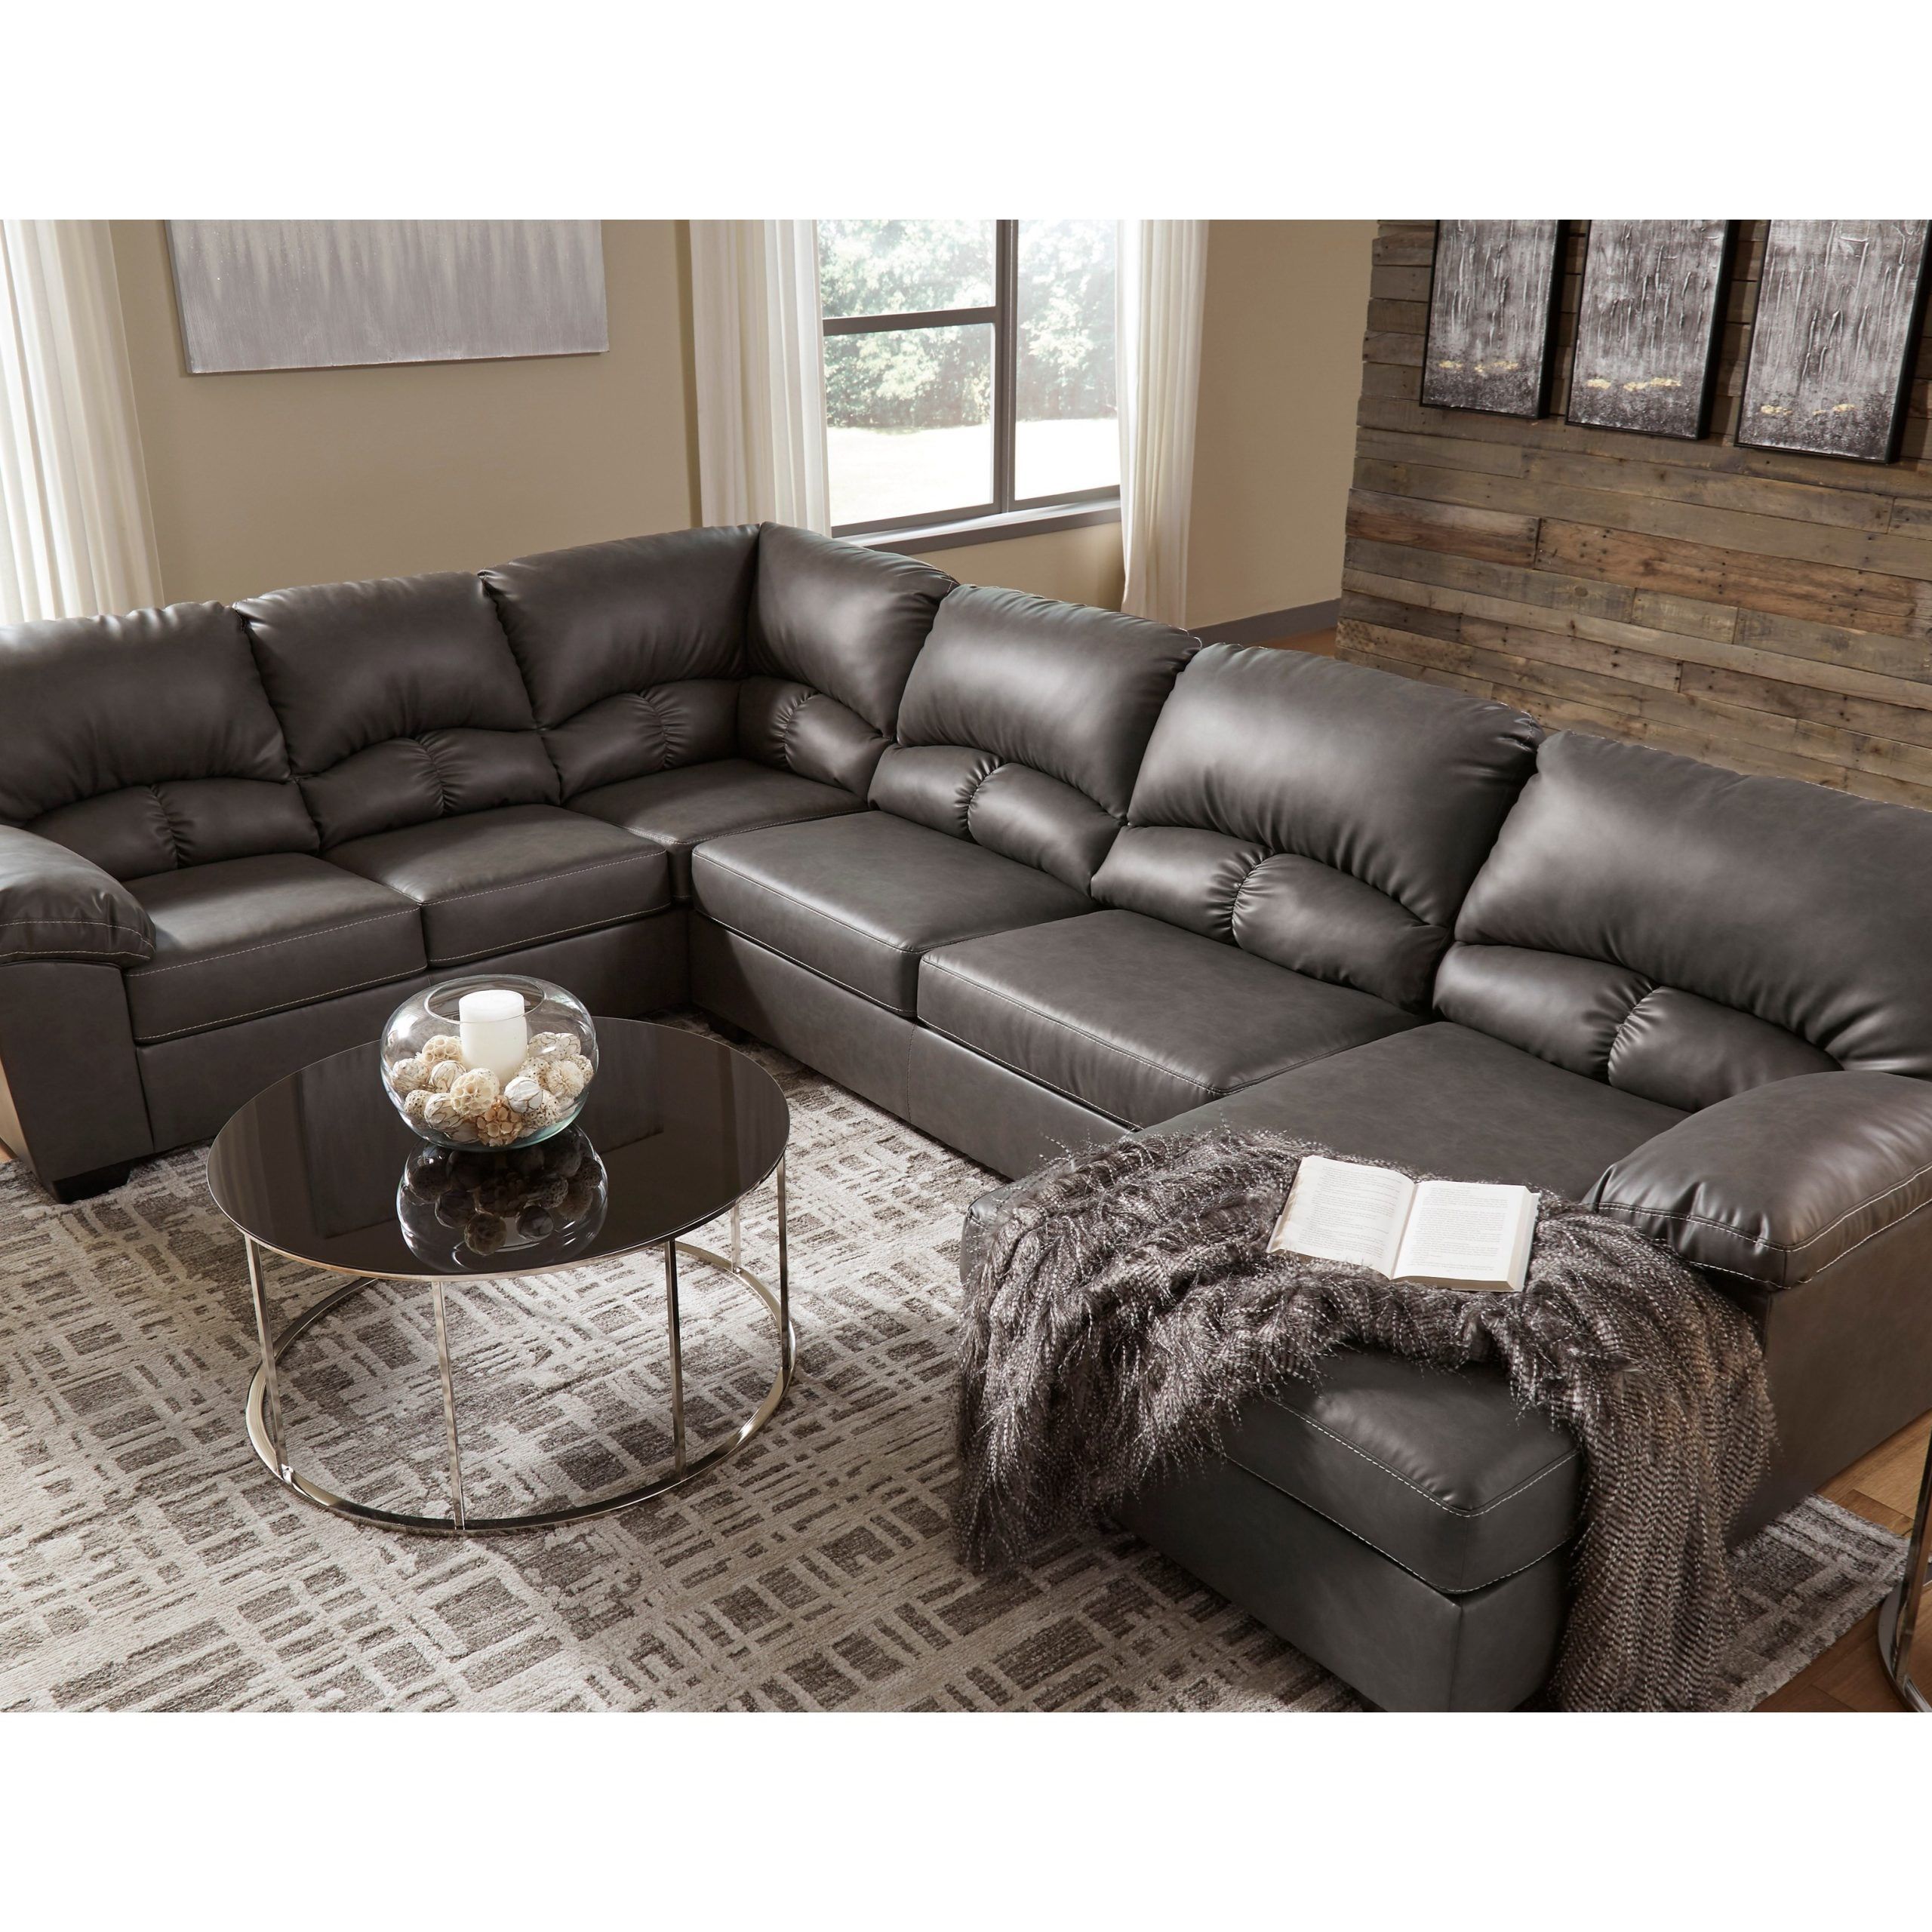 Benchcraft Aberton Faux Leather 3 Piece Sectional With Chaise | Wayside For 104" Sectional Sofas (View 11 of 20)